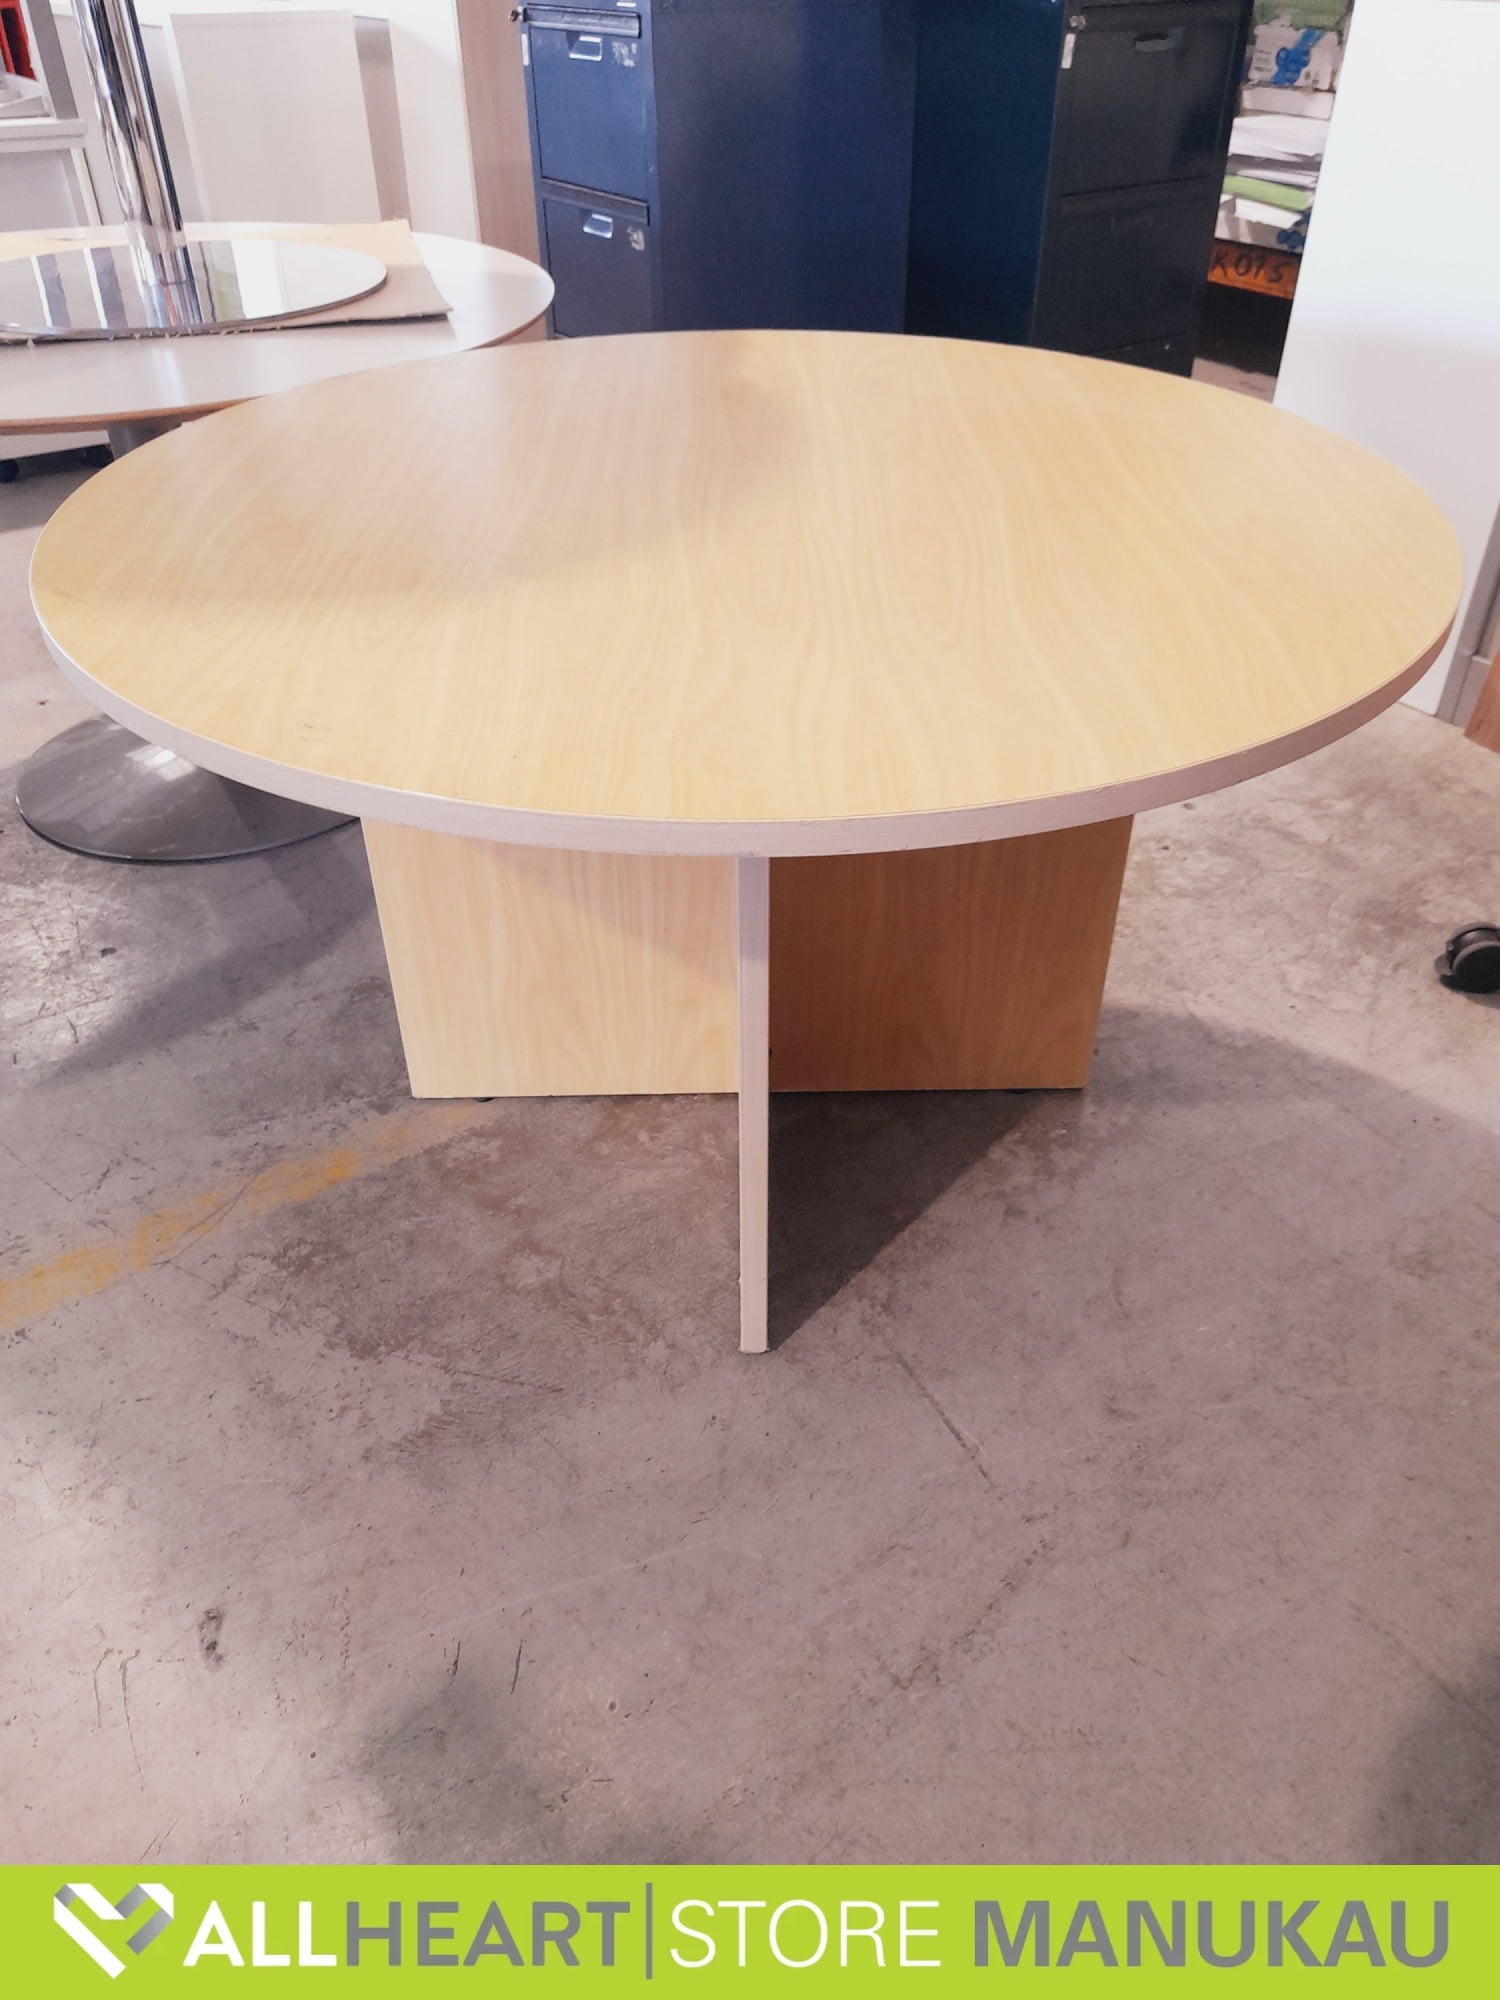 1200mm DIA - Round Table - Light Brown